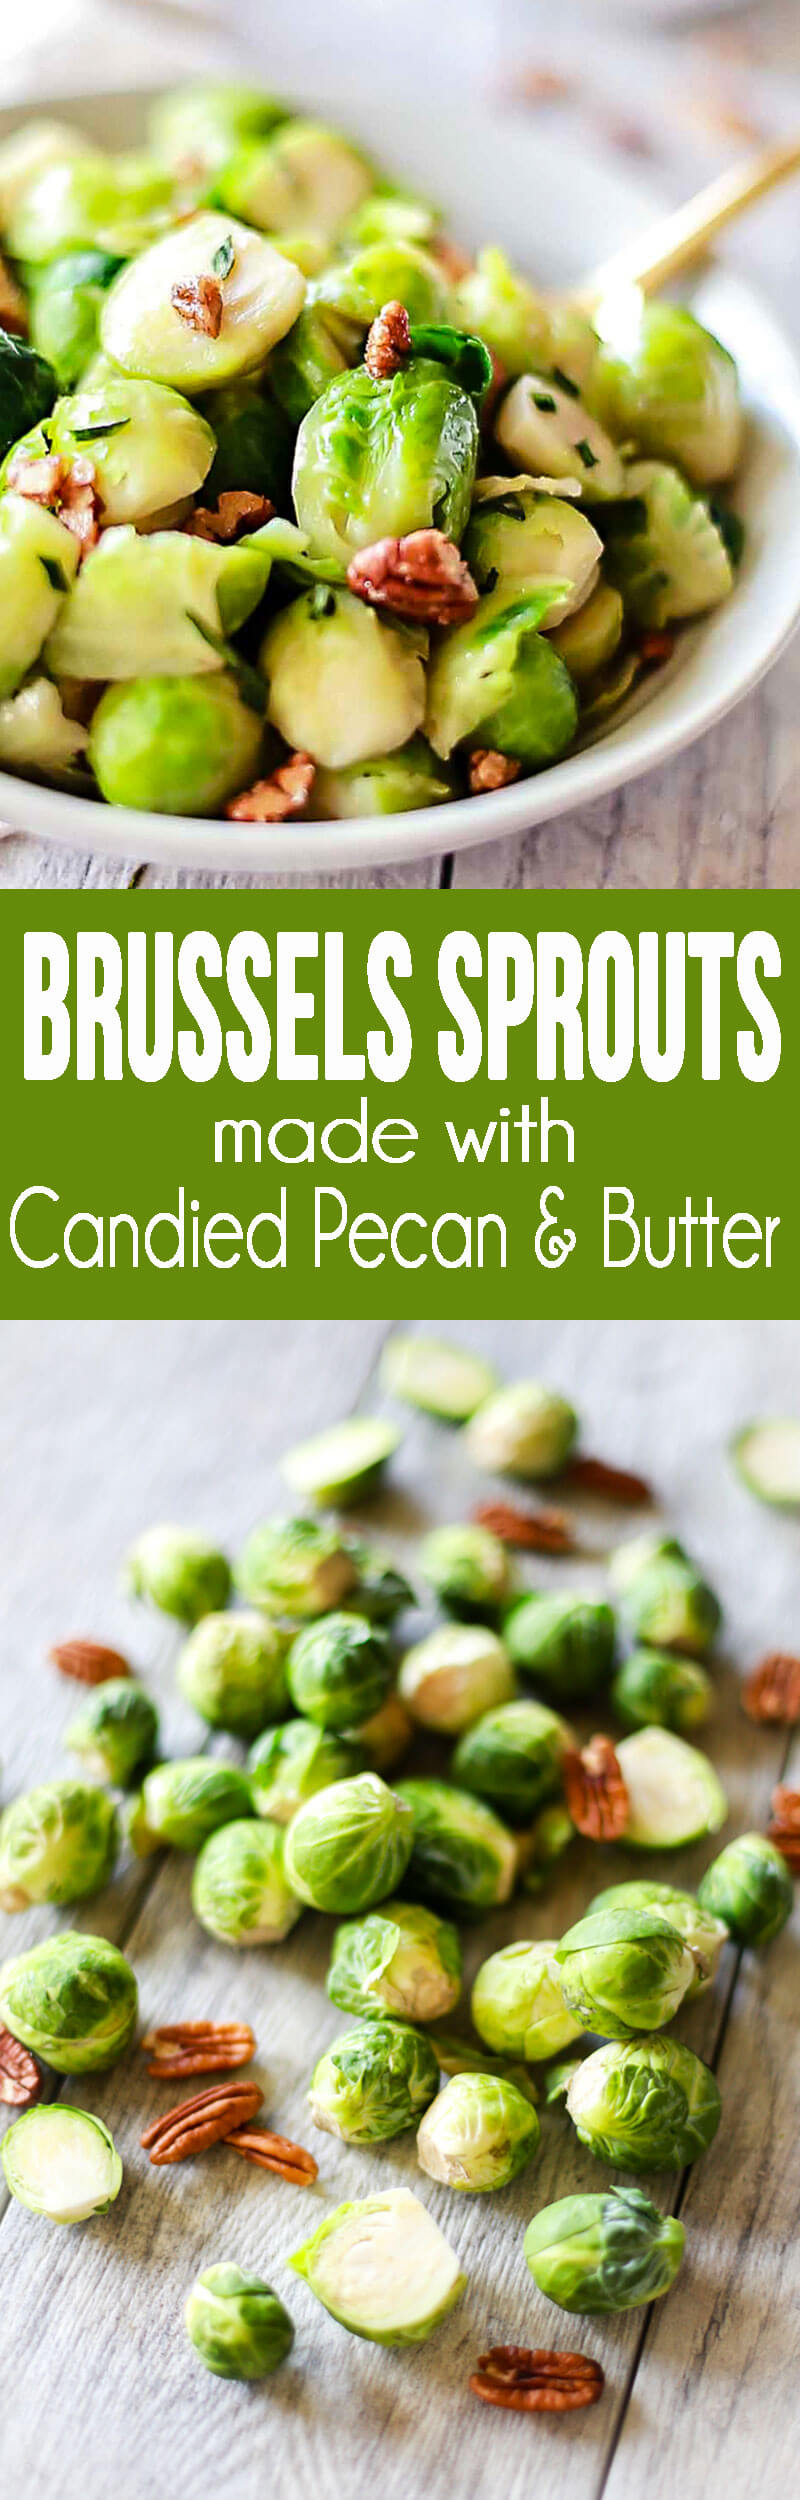 Brussels Sprouts made with Candied Pecan & Butter